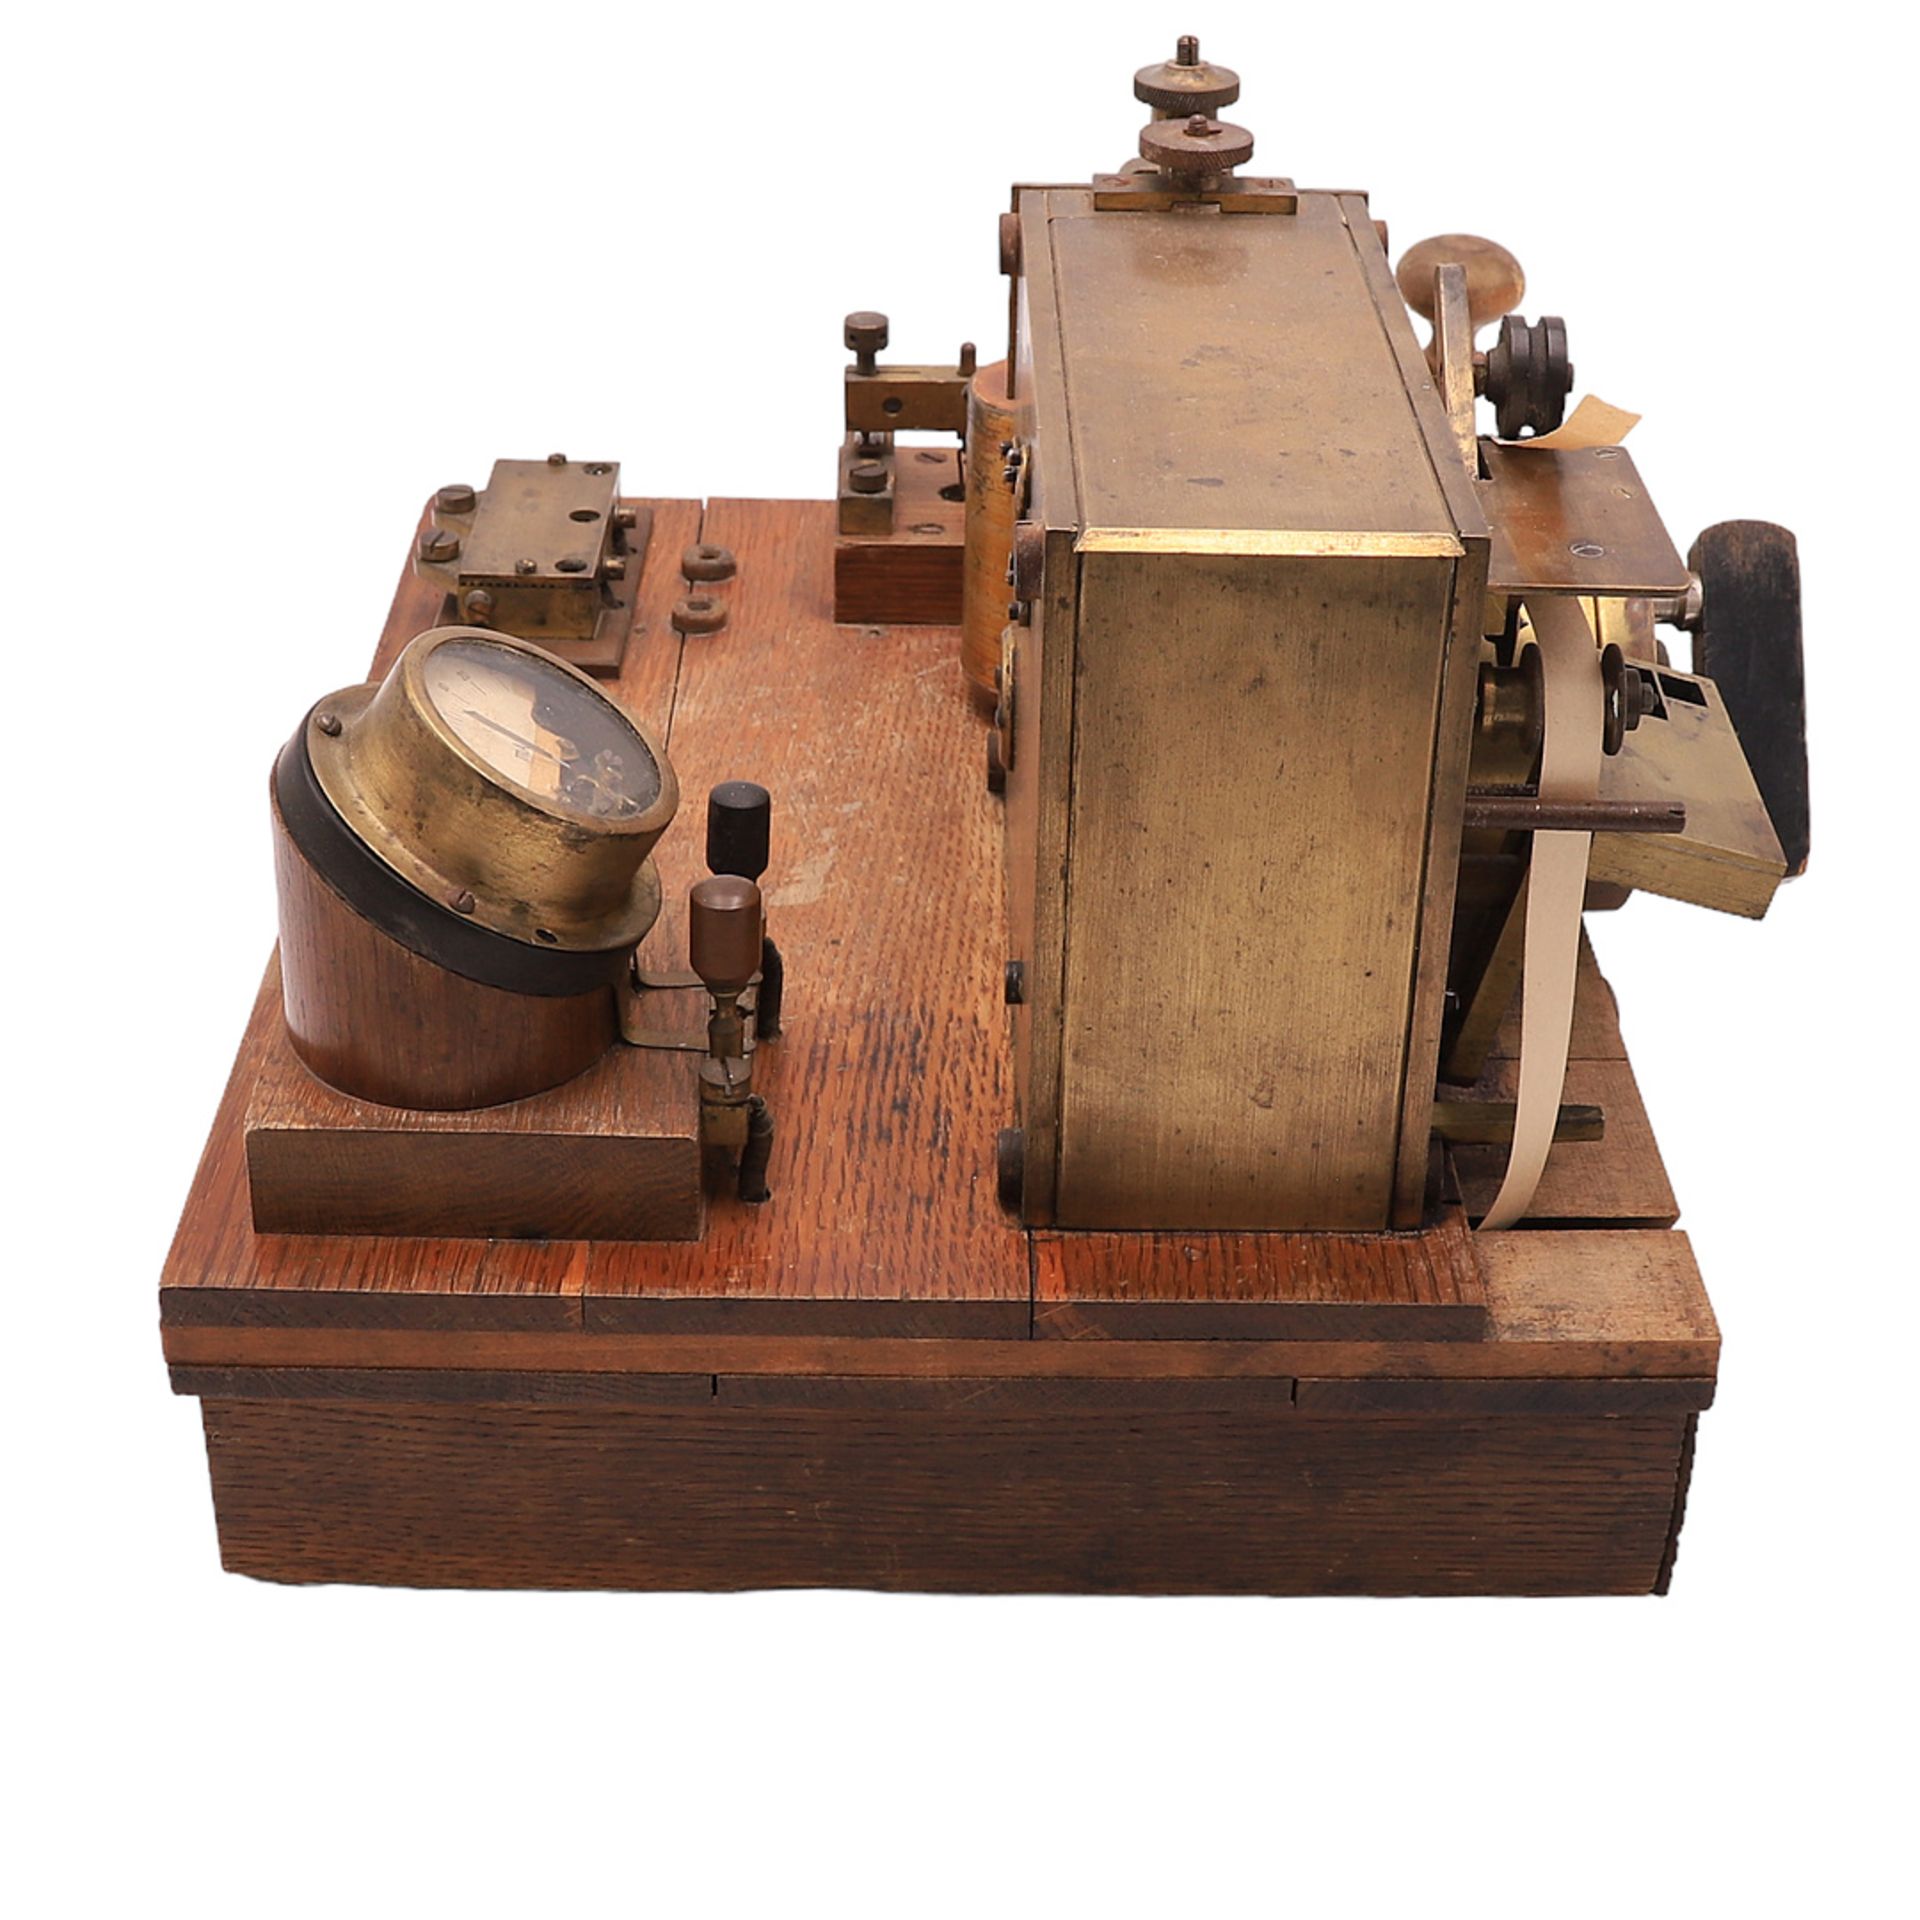 Morse code device, Germany, 2nd half of the 19th century - Image 2 of 4